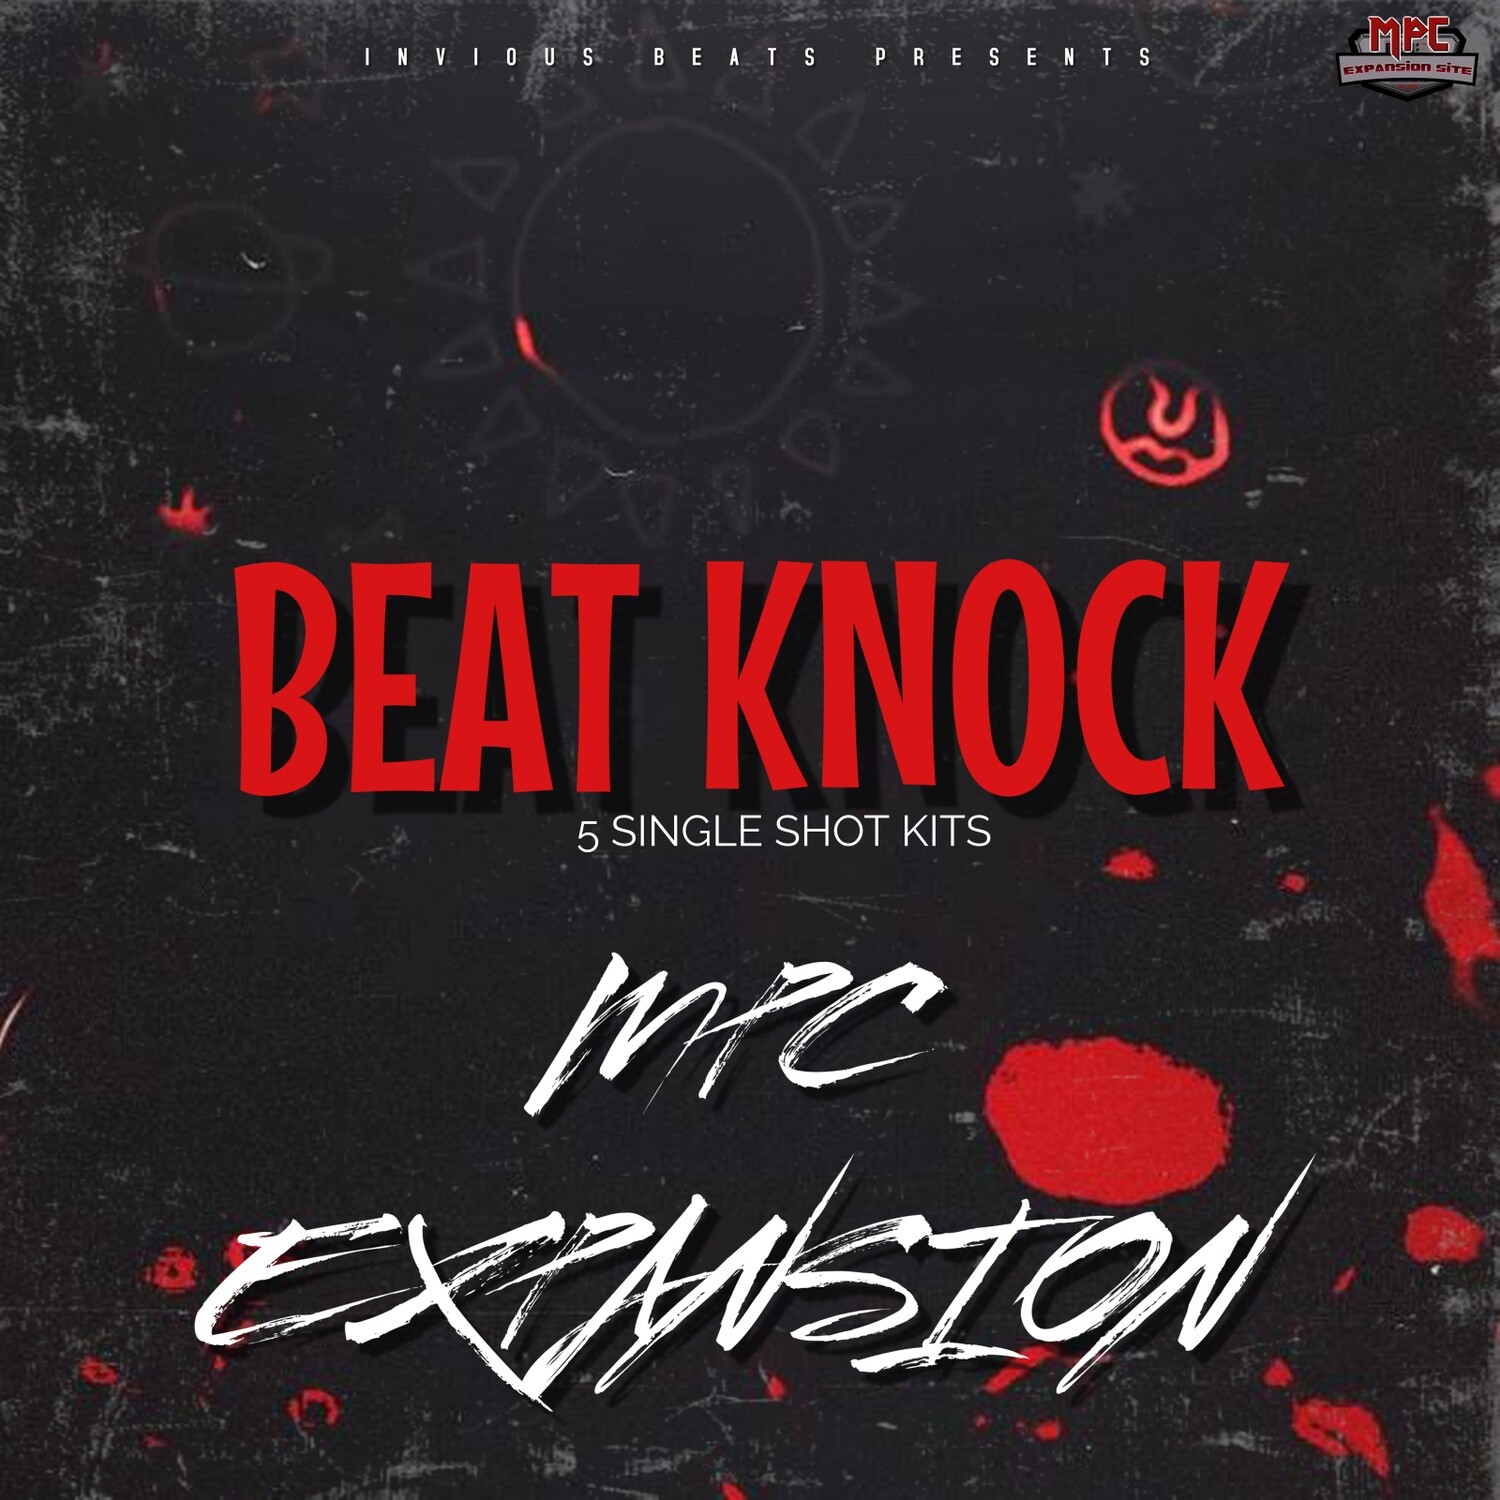 MPC EXPANSION &#39;BEAT KNOCK&#39; by INVIOUS